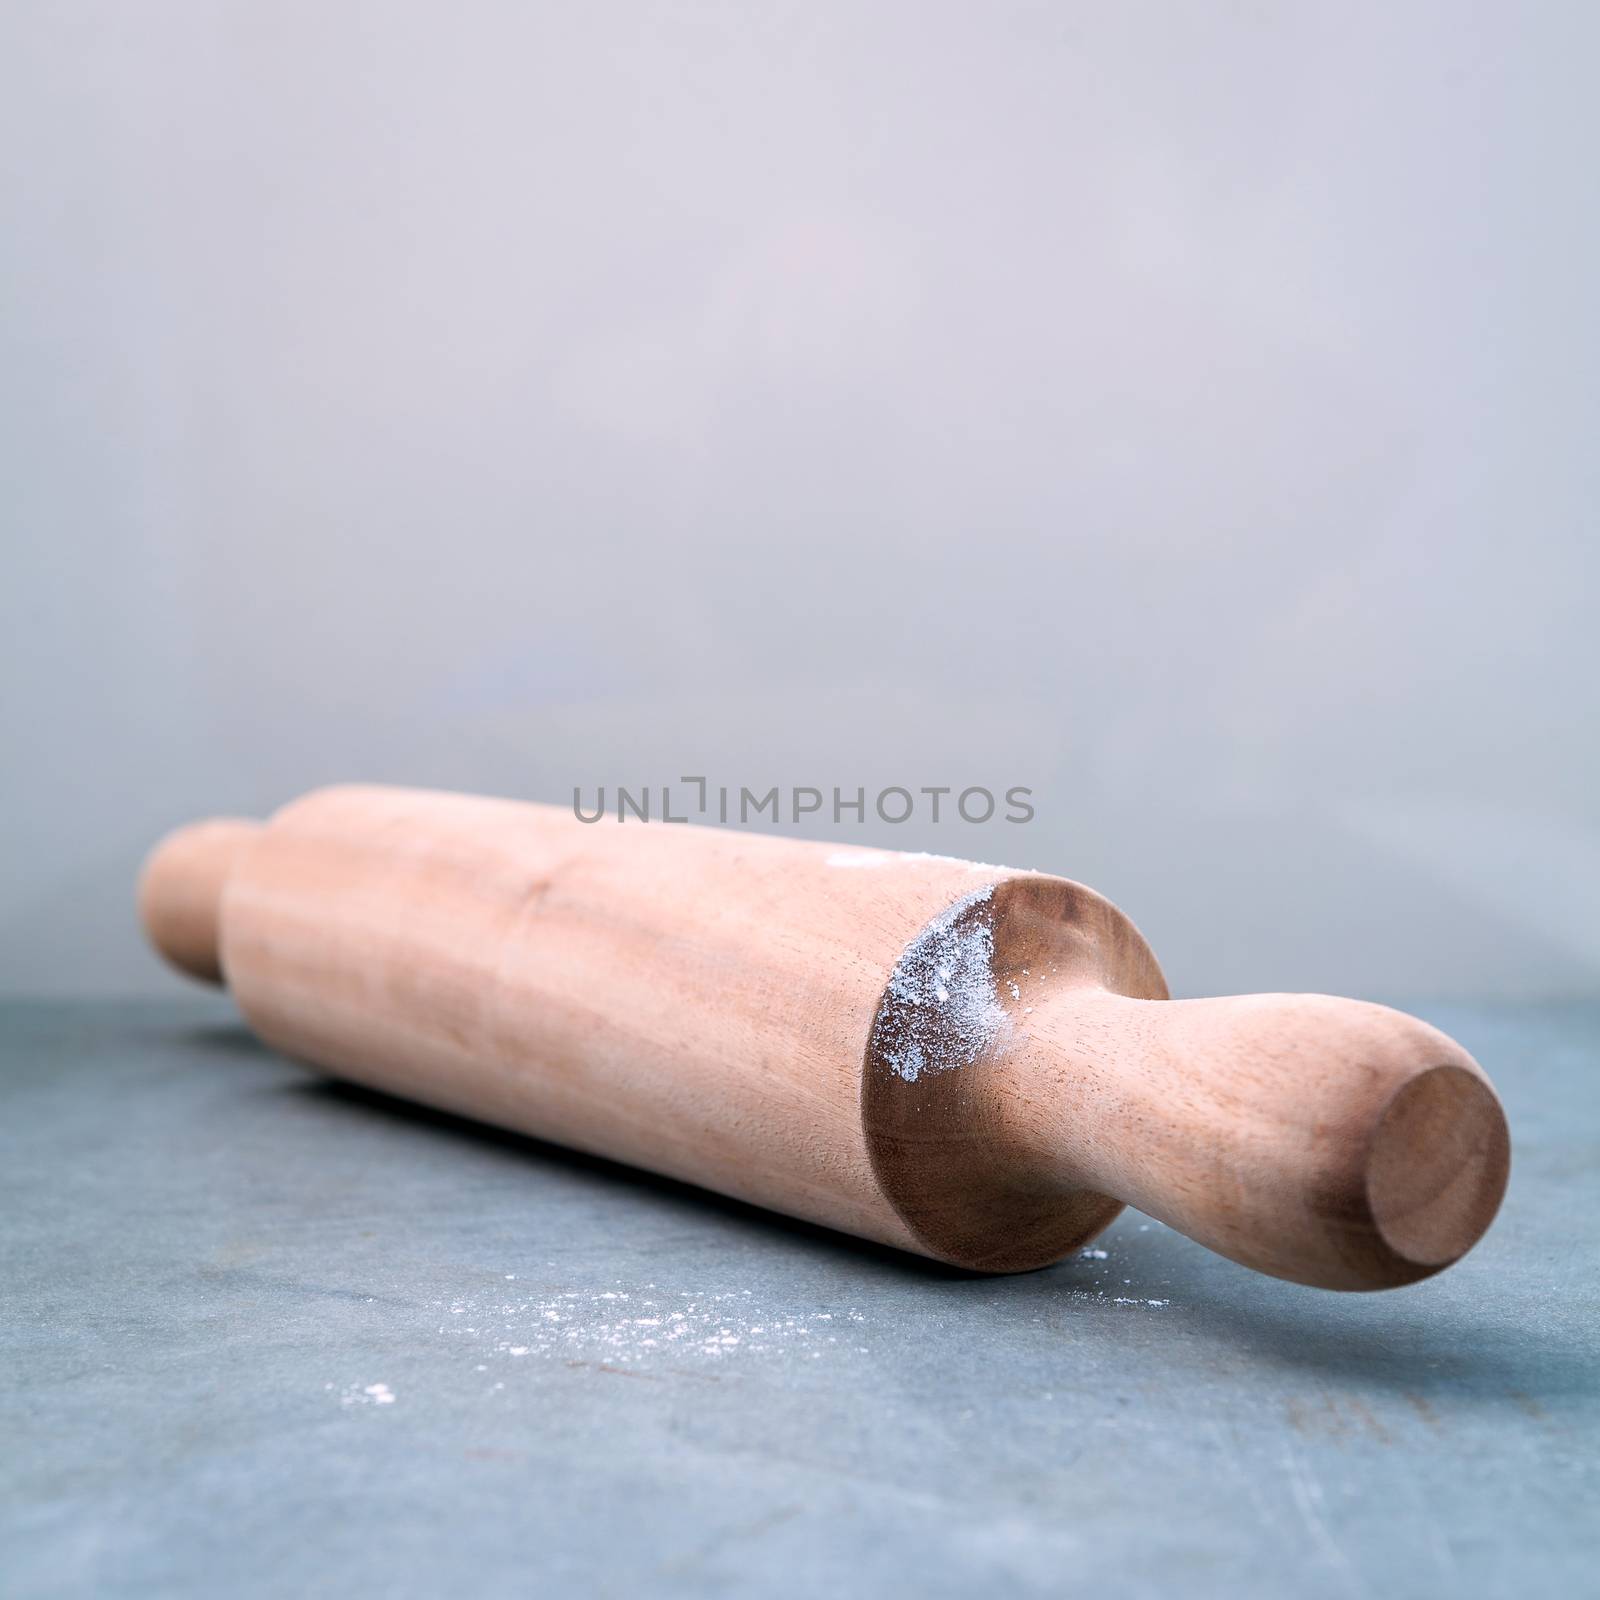 Kitchen rolling pin with flour on dark background selective focus depth of field . Concept for international cuisine.